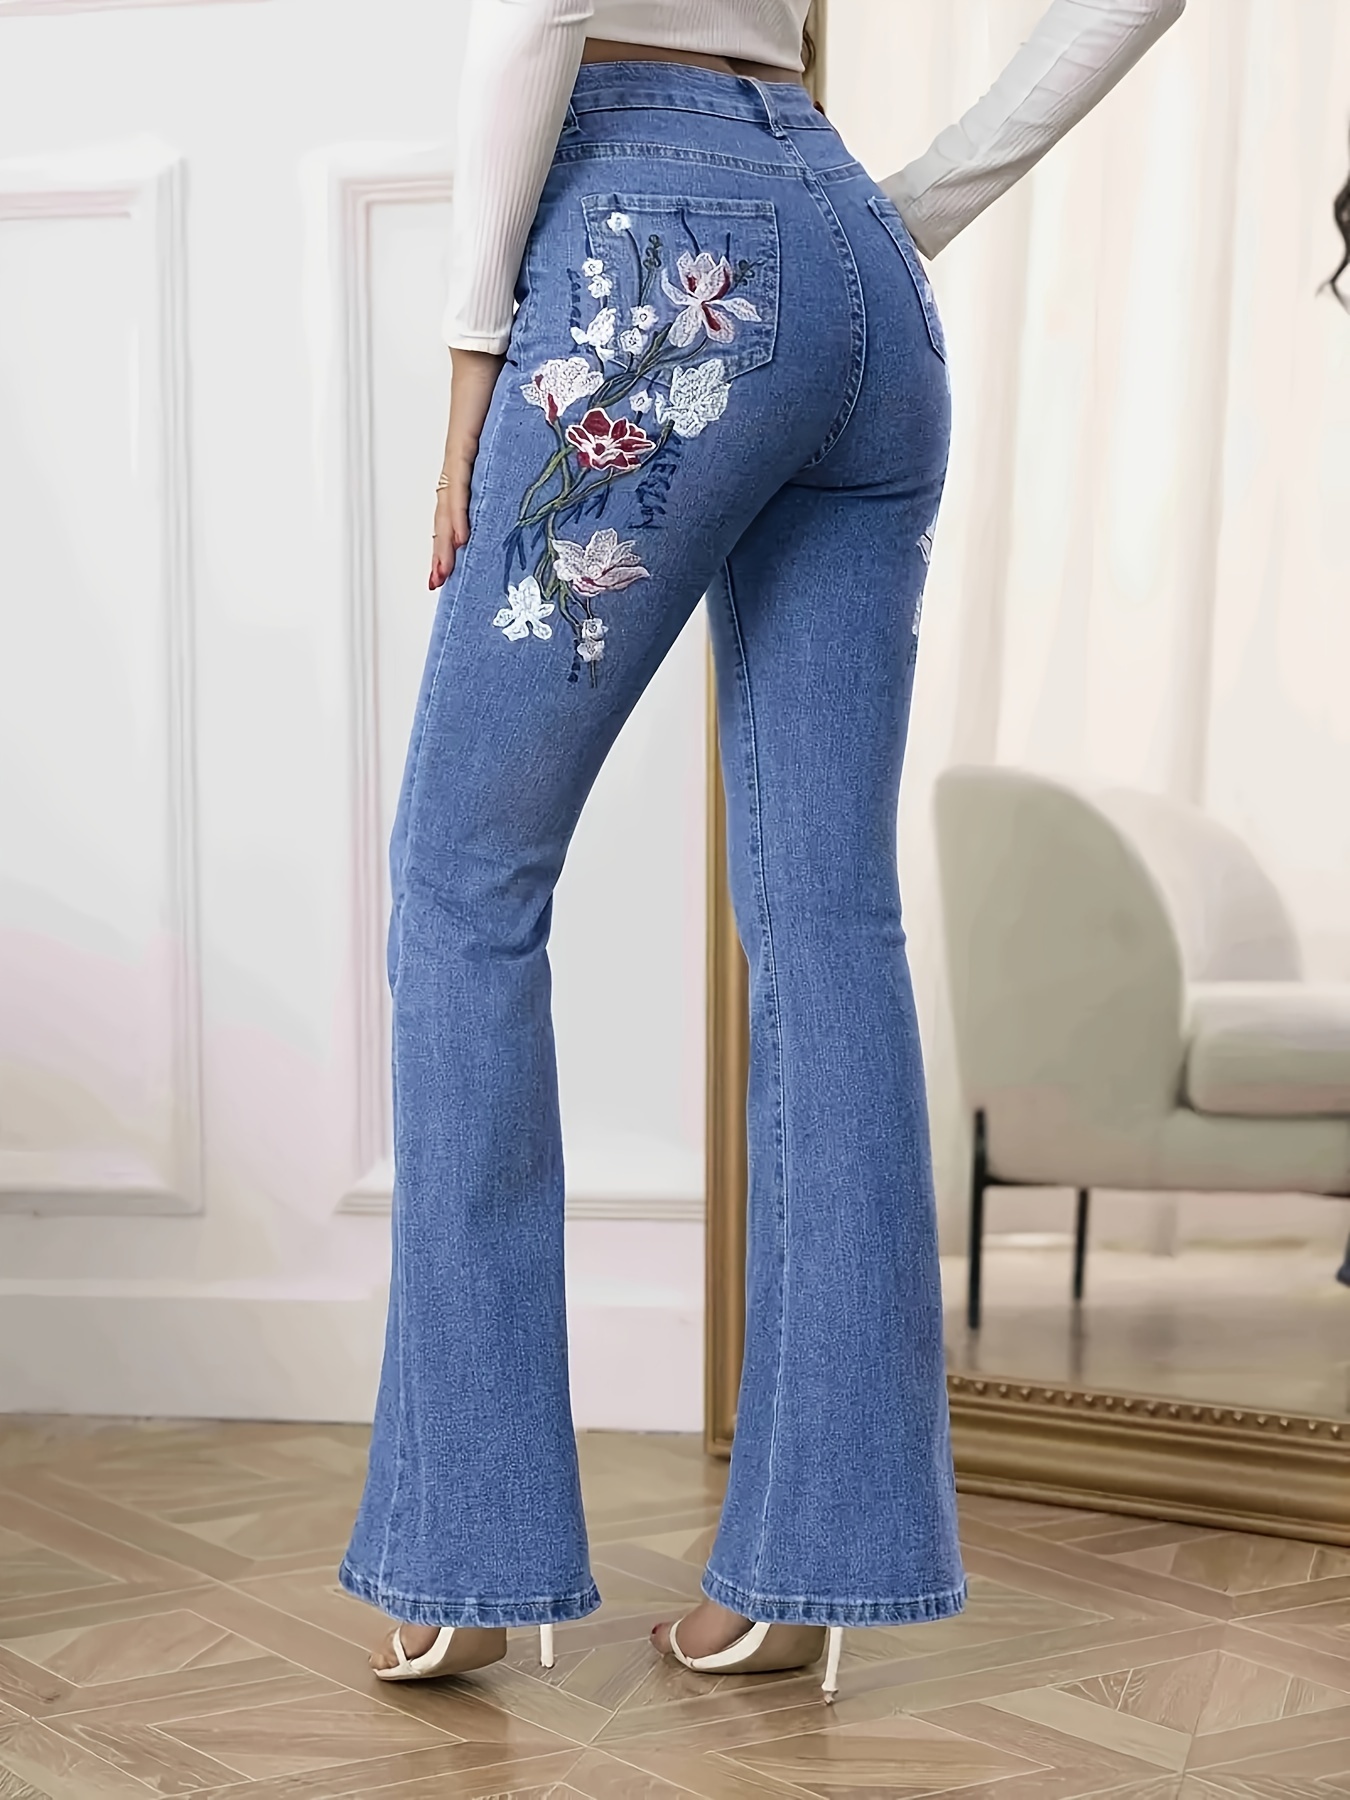 Women's Chic Floral Embroidered High-Rise Bell Bottom Flare Jeans Blue  XS~3XL